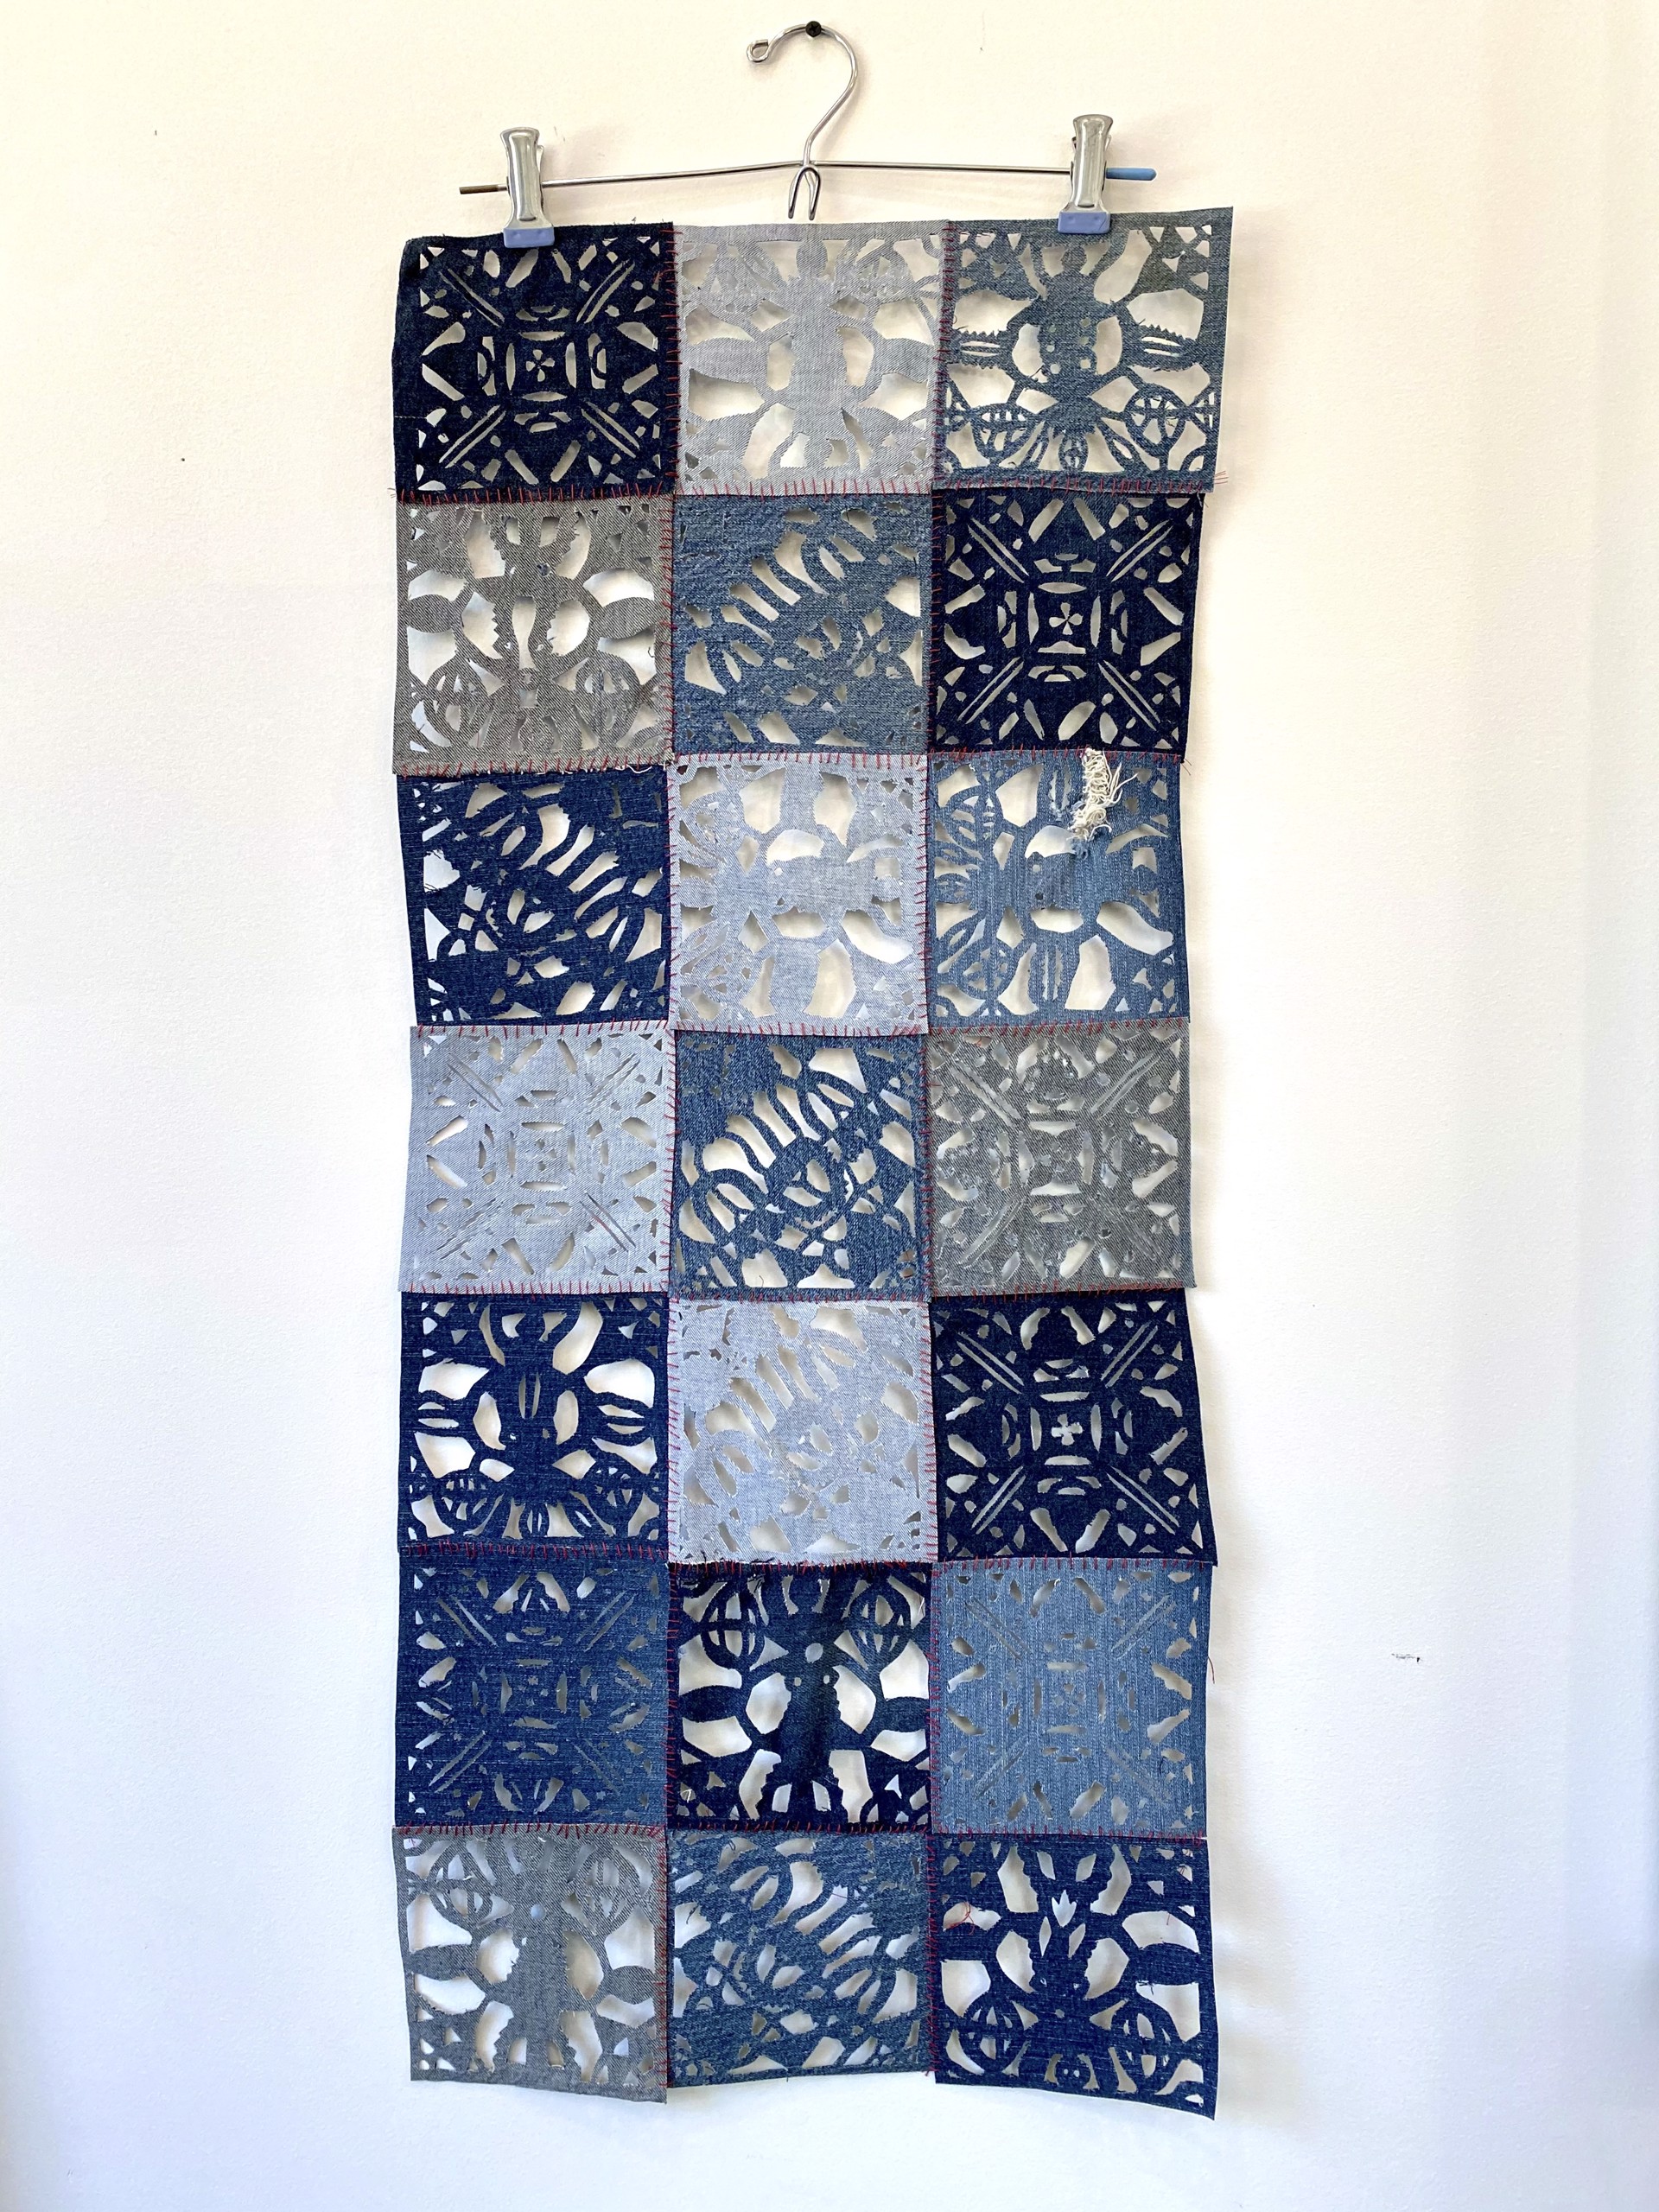 Meticulously Distressed Denim Lace Patchwork by Libby Newell